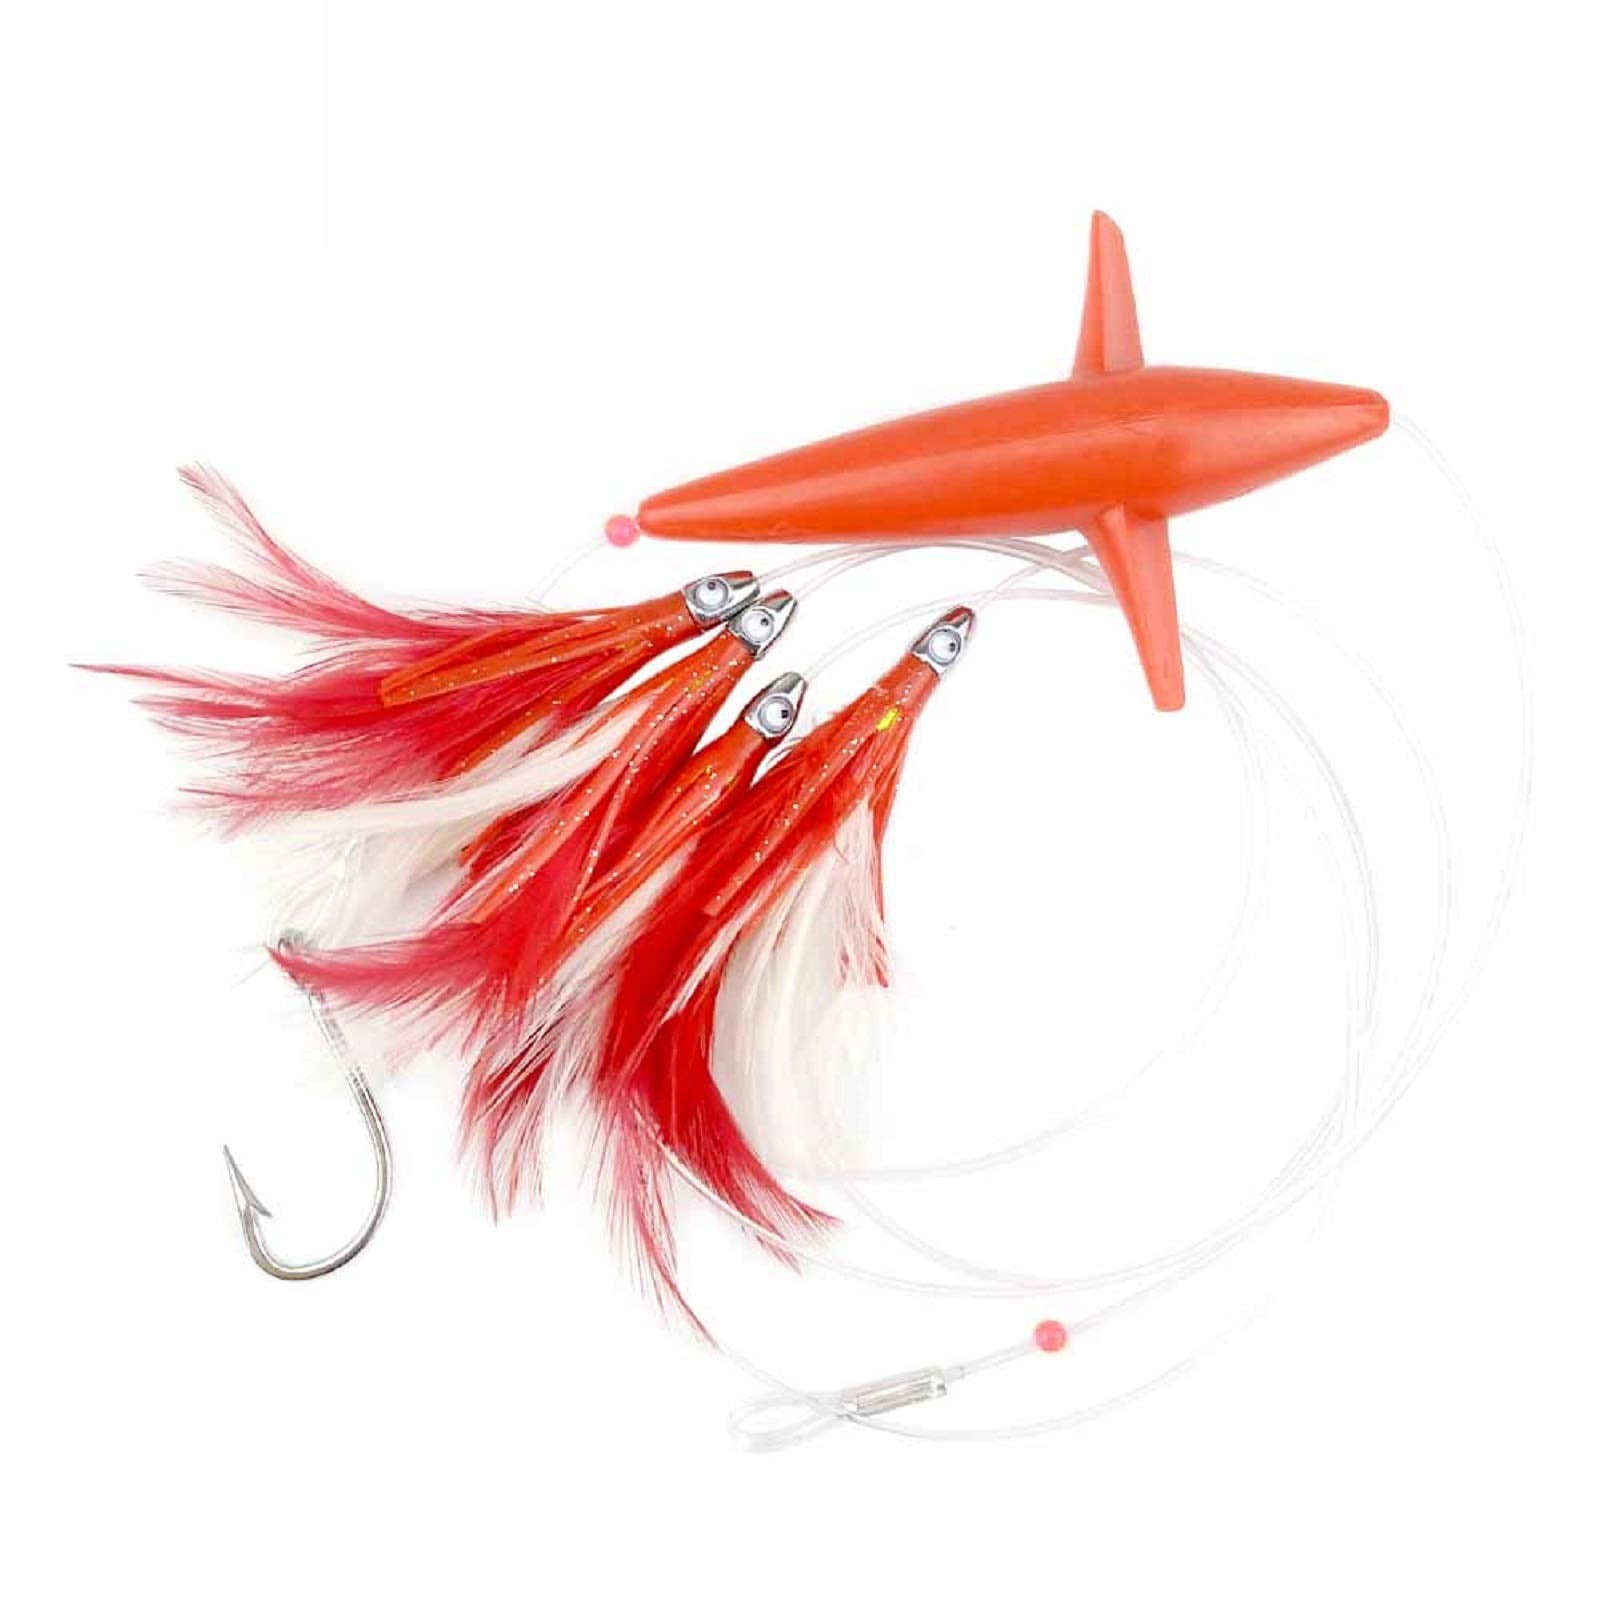 OCEAN CAT Trolling Fishing Lures Daisy Chain Bird Feather Teaser for  Fishing with Rigged Hook 7/0 for Mahi, Tuna, Wahoo and More (Red) 